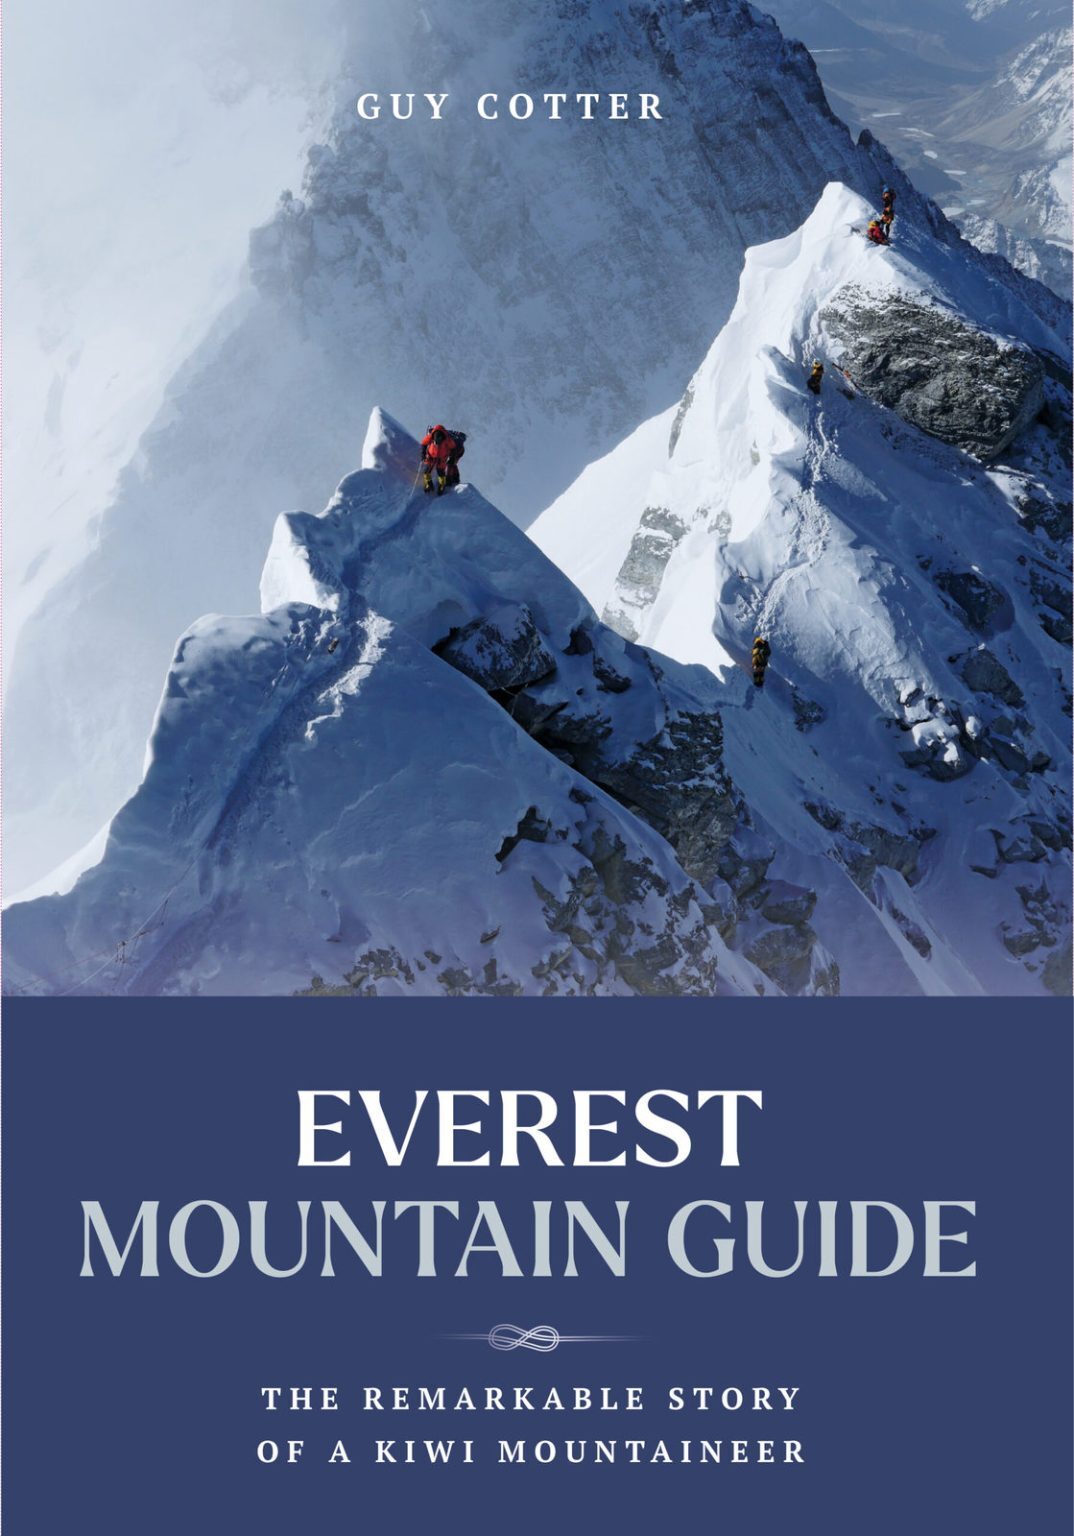 Image of the front cover of the book Everest Mountain Guide by Guy Cotter